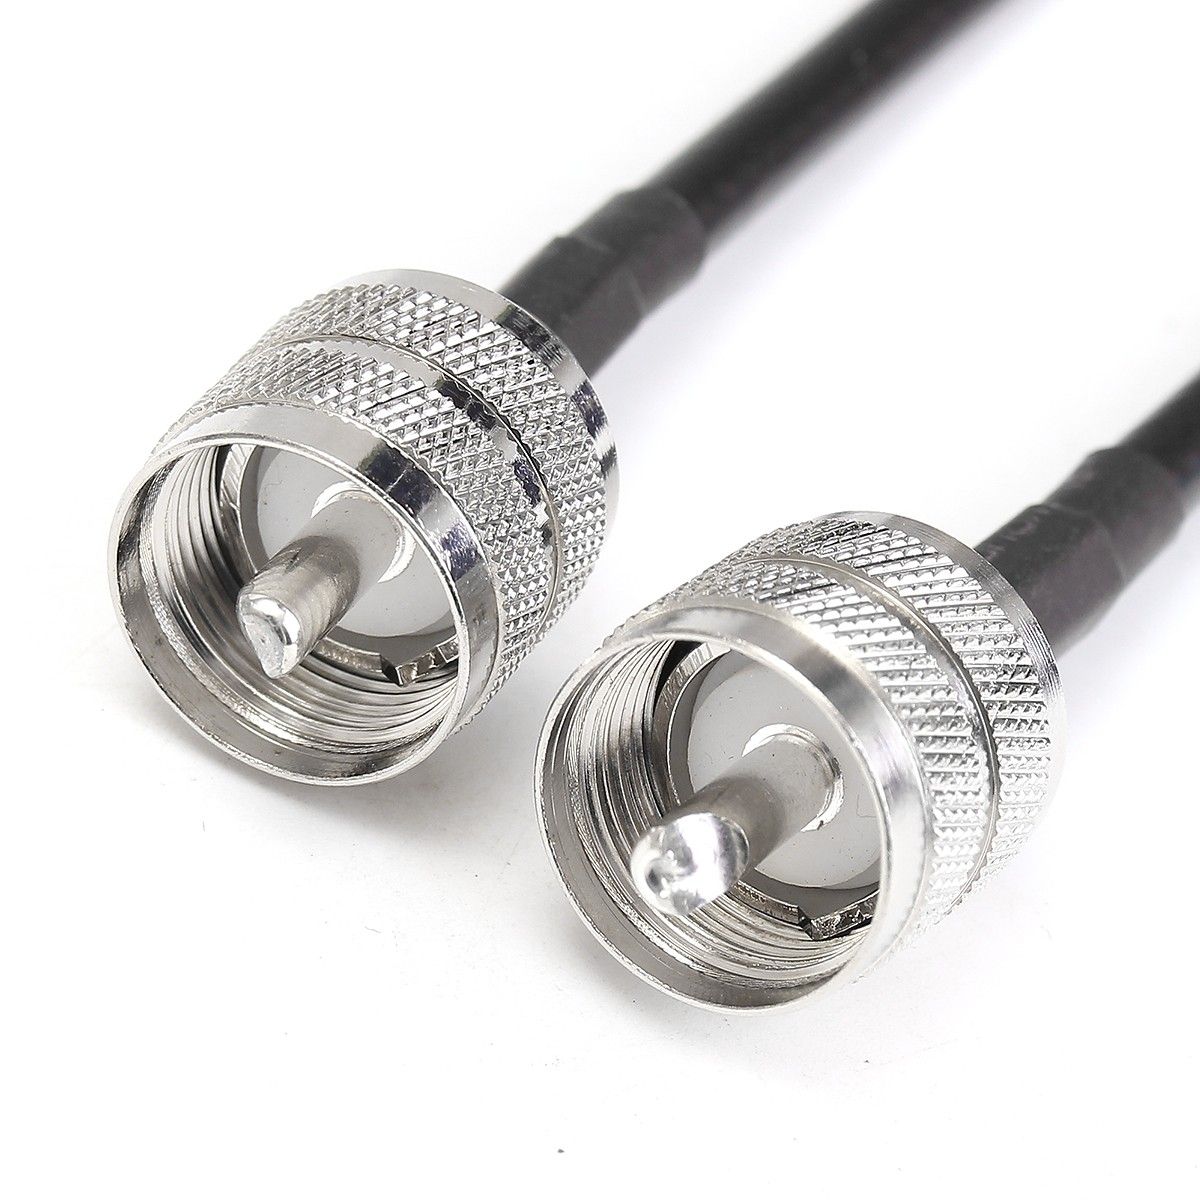 1Pc-UHF-PL259-Male-to-Male-Plug-Coax-Coaxial-Cable-20-Inch-50cm-RG58-Soldered-1090335